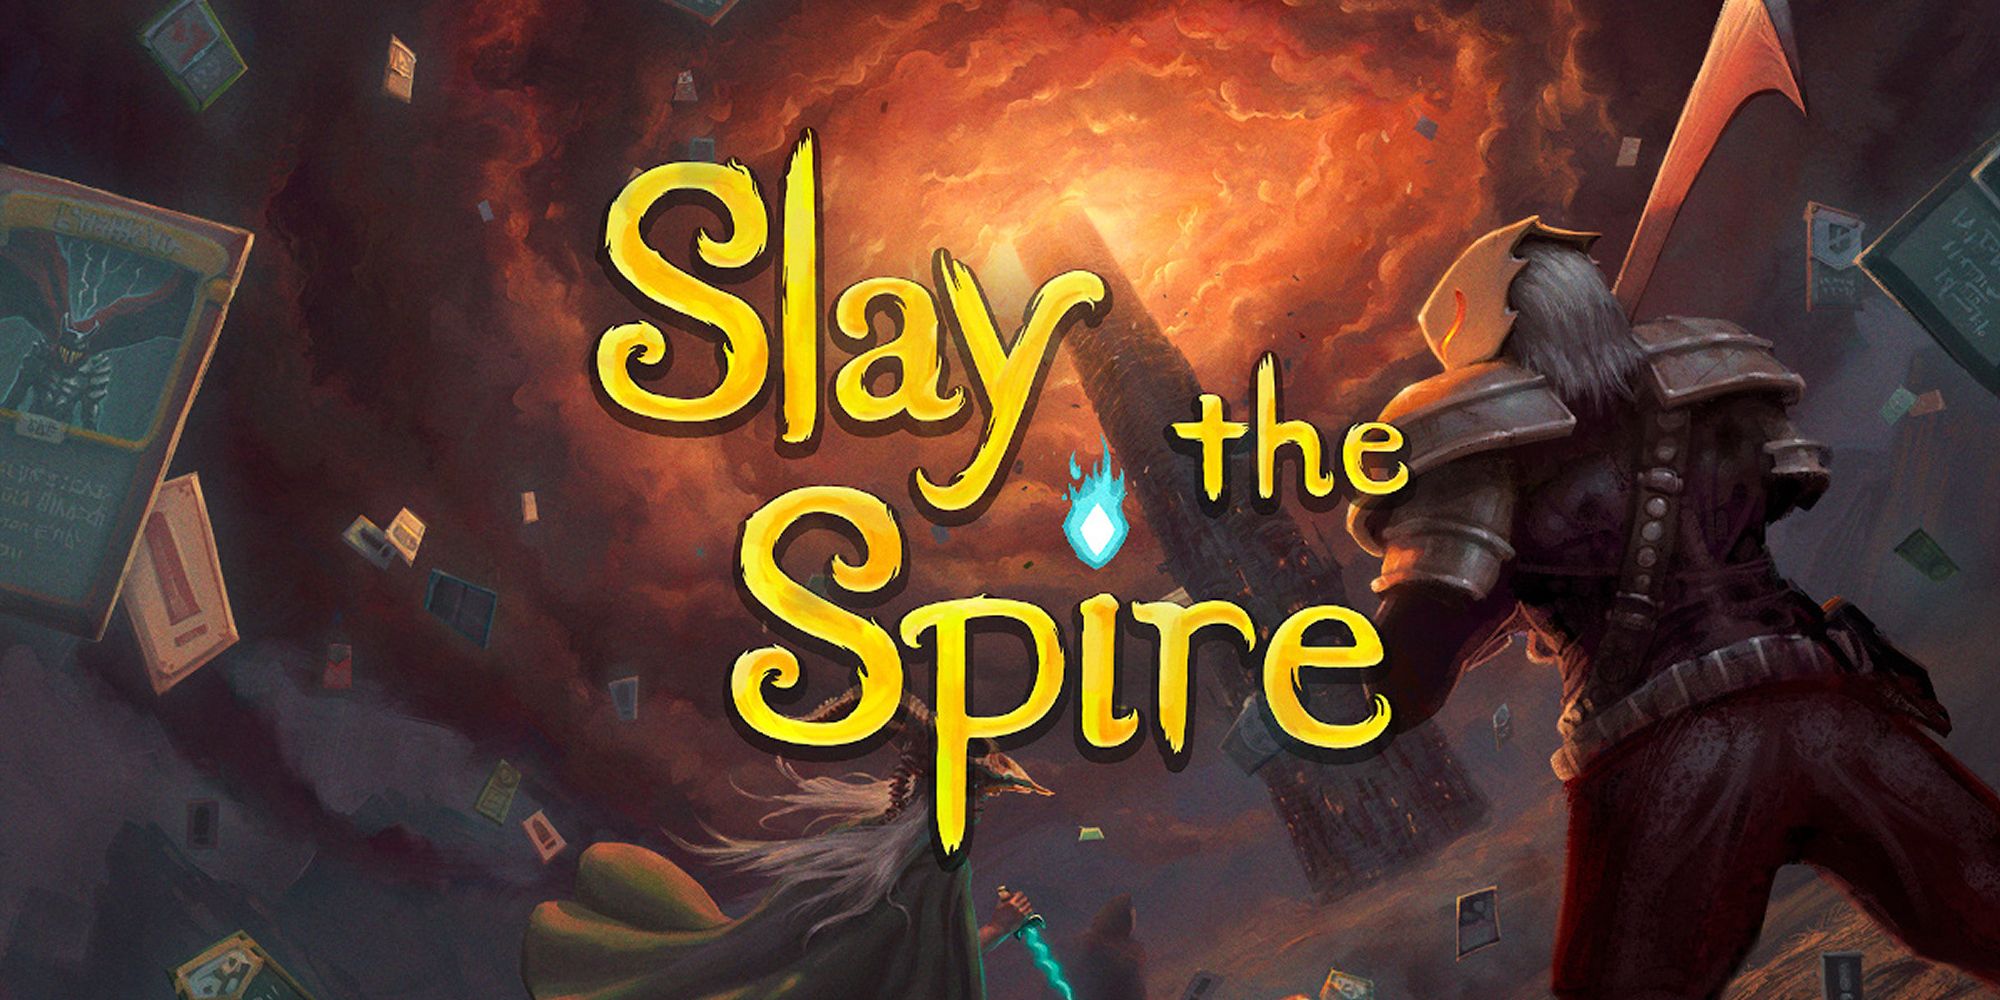 Slay The Spire - A Knight Looking Up At A Dark, Cloudy Sky